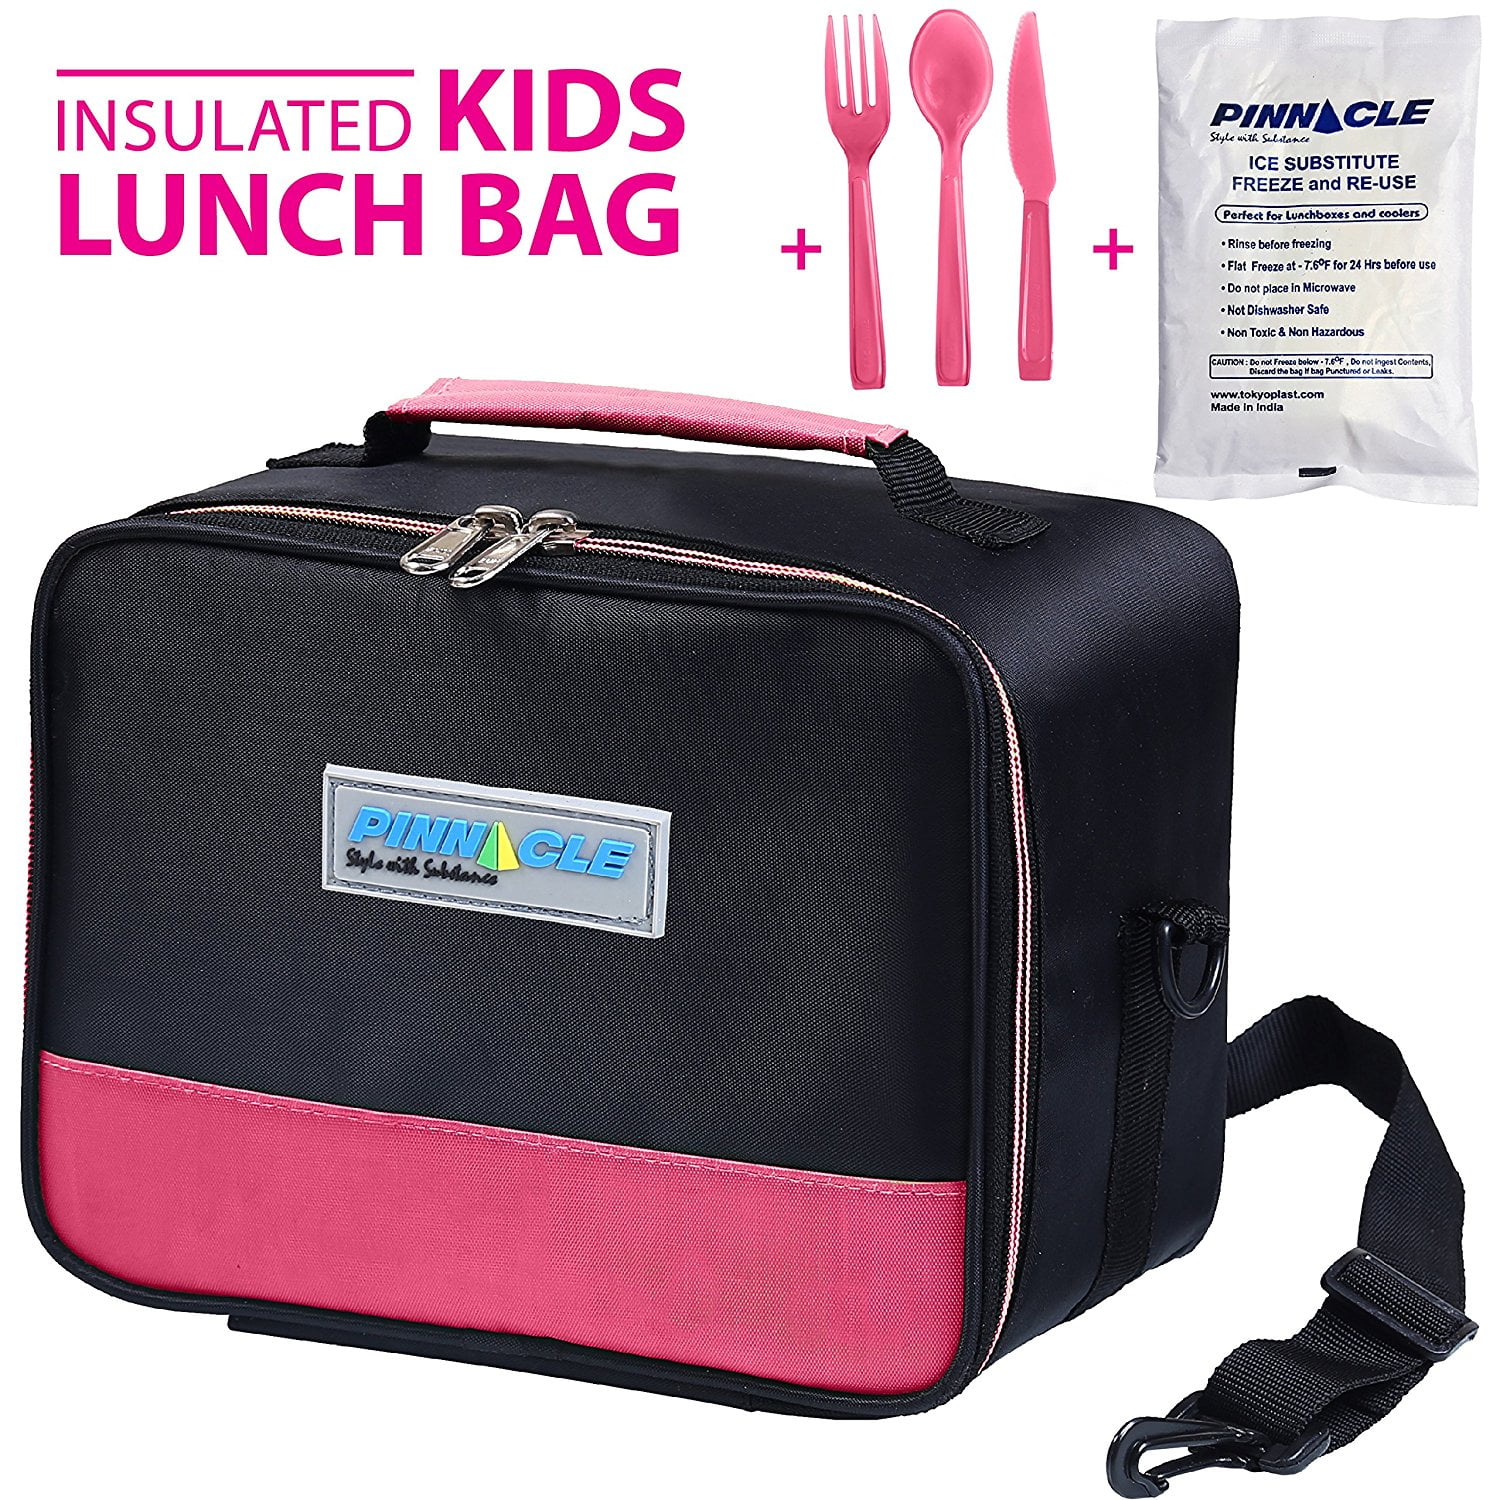 Flexzion Kids Insulated Lunch Bag for Girls and Boys, Toddler Lunch Box School Kids Lunch Bag Bento Box Daycare Lunch Box Picnic Cooler Tote Bag